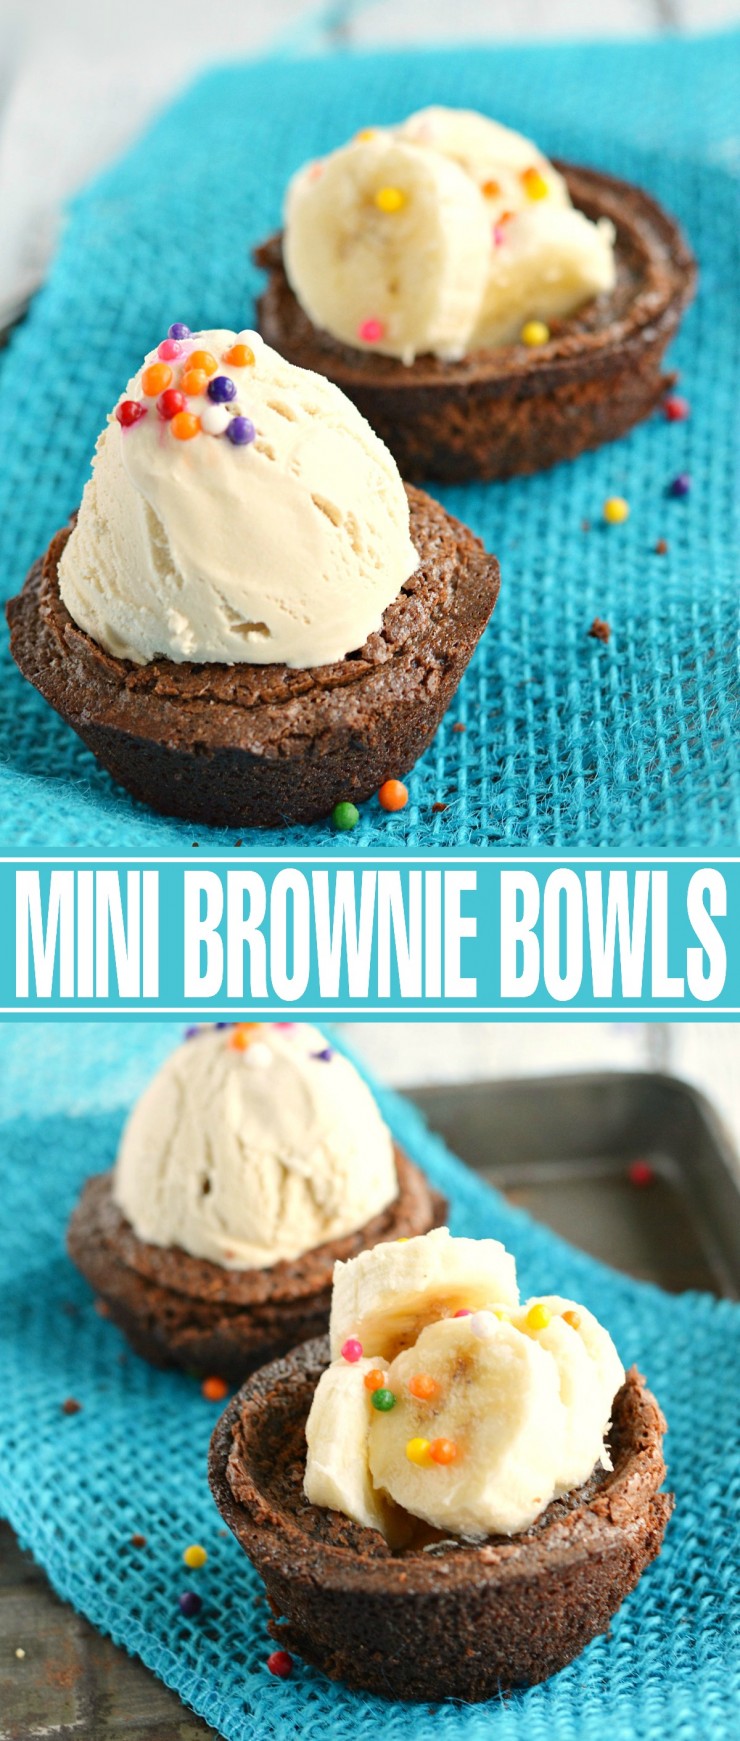 These Mini Brownie Bowls are super easy to make and are fun to fill with everything from fruit to ice cream. These are great for a tasty treat or a party dessert!